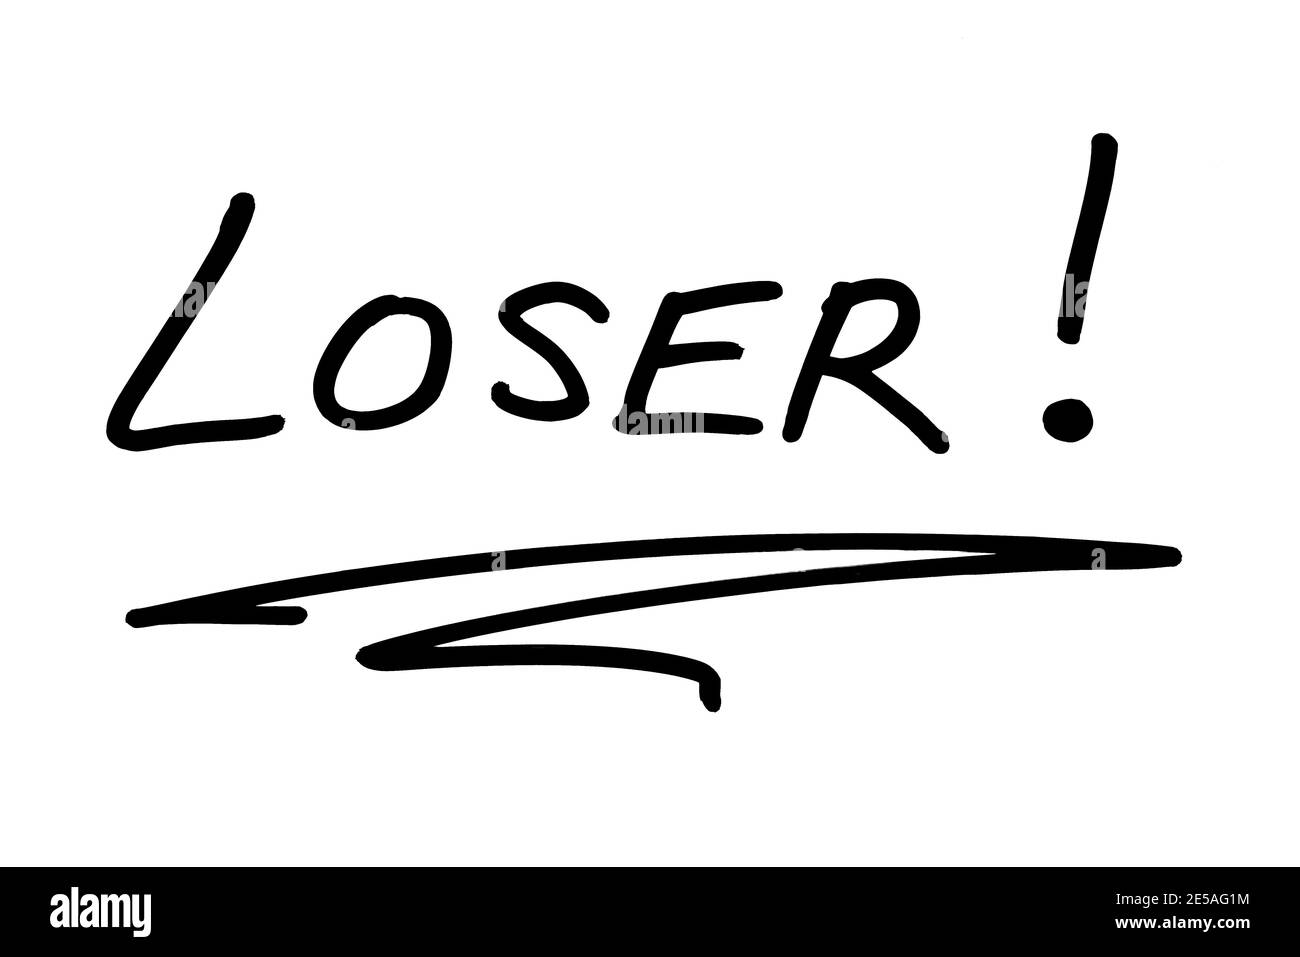 The word LOSER! handwritten on a white background. Stock Photo